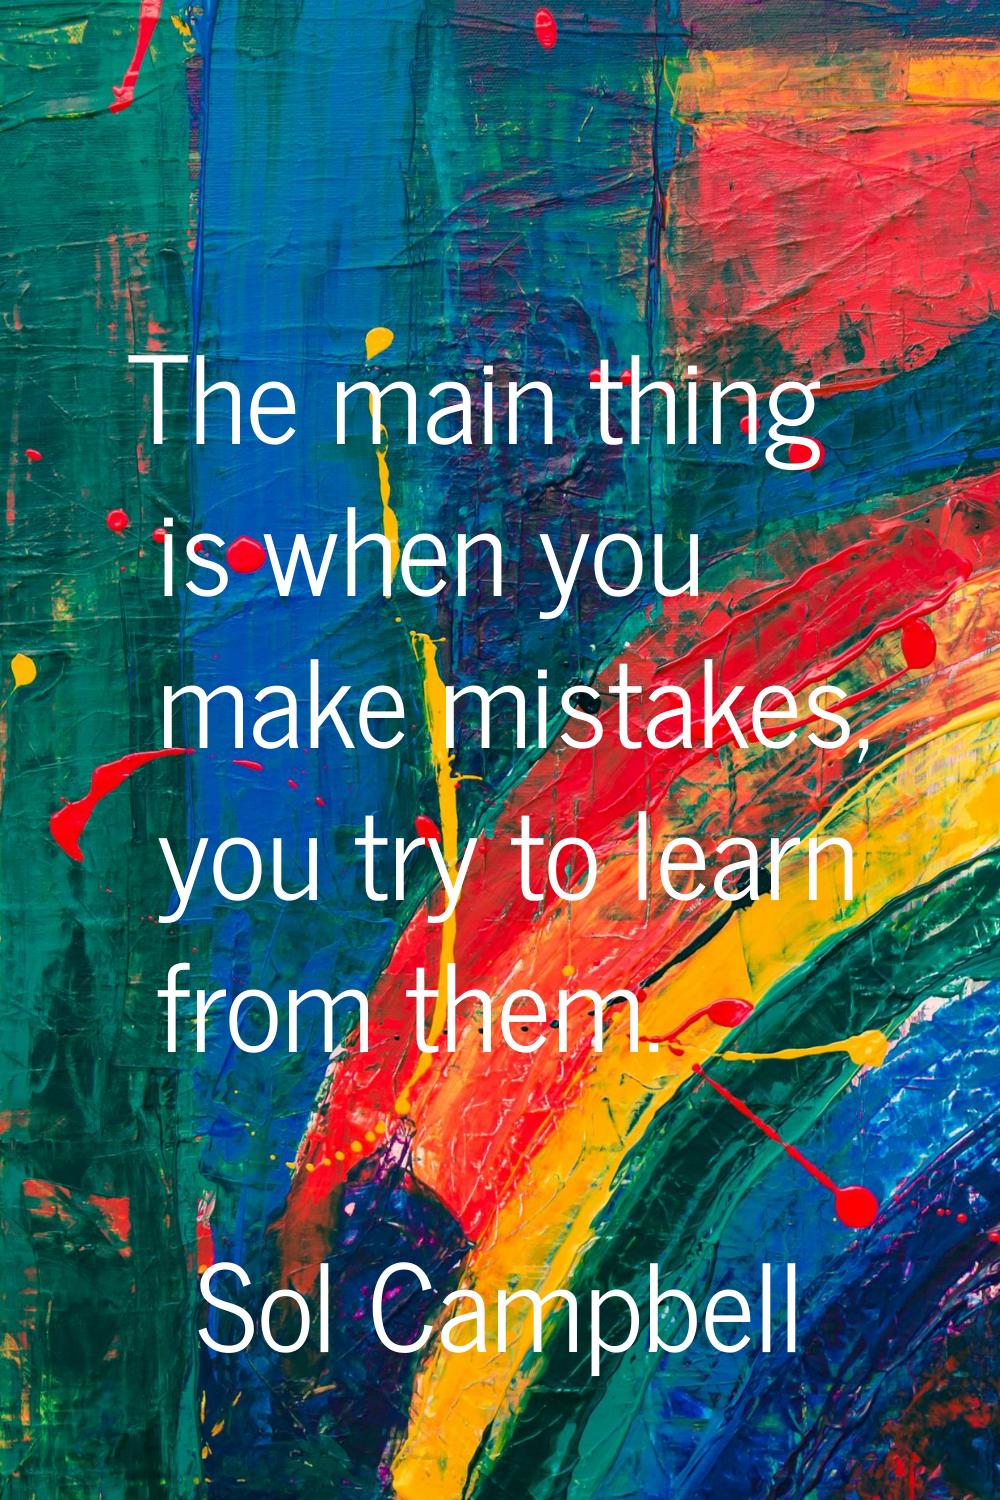 The main thing is when you make mistakes, you try to learn from them.